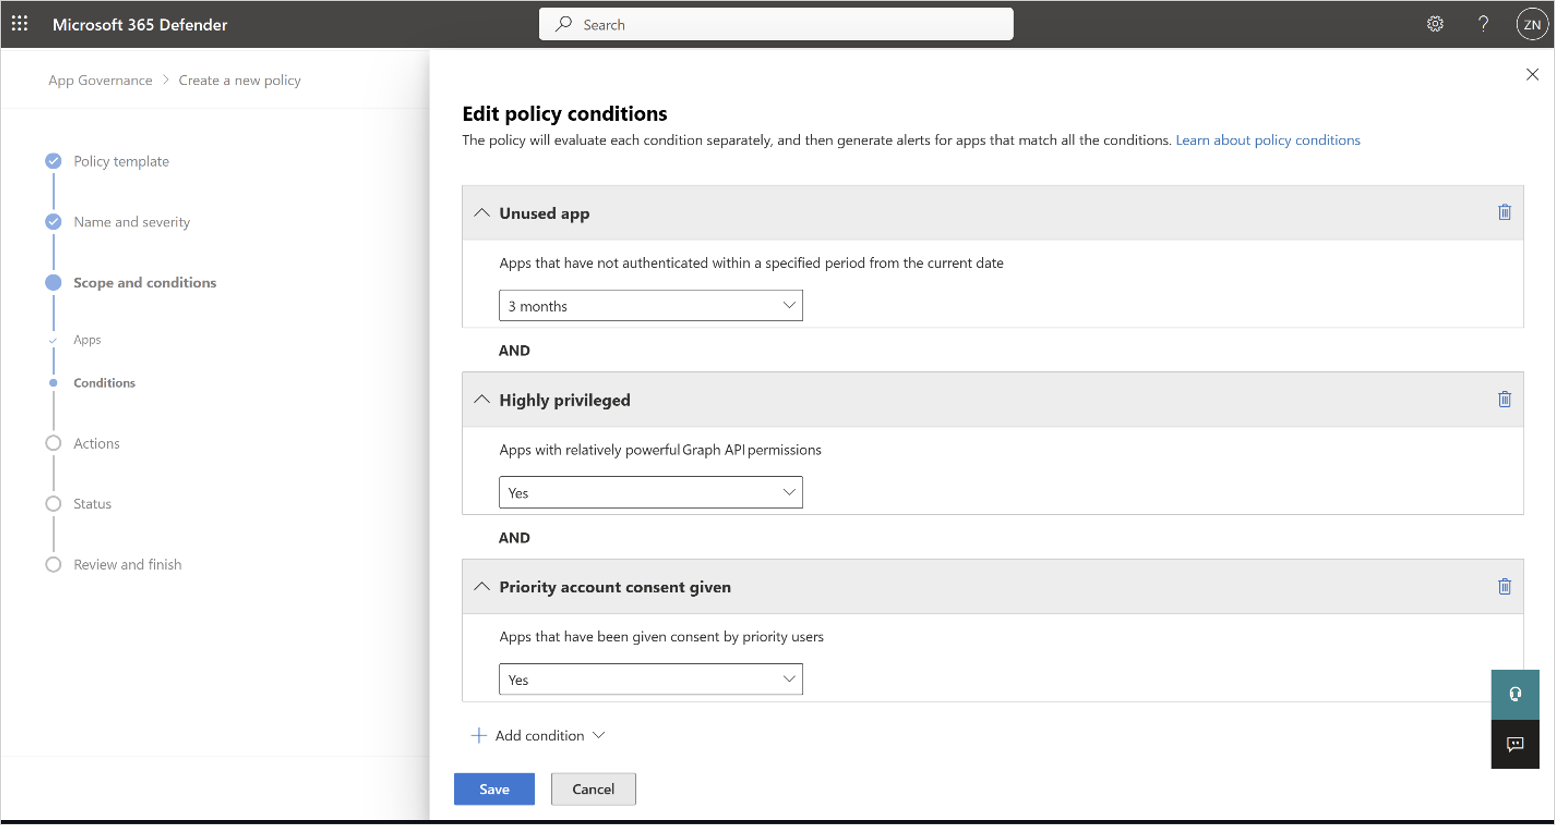 Screenshot of the Edit policy conditions page.